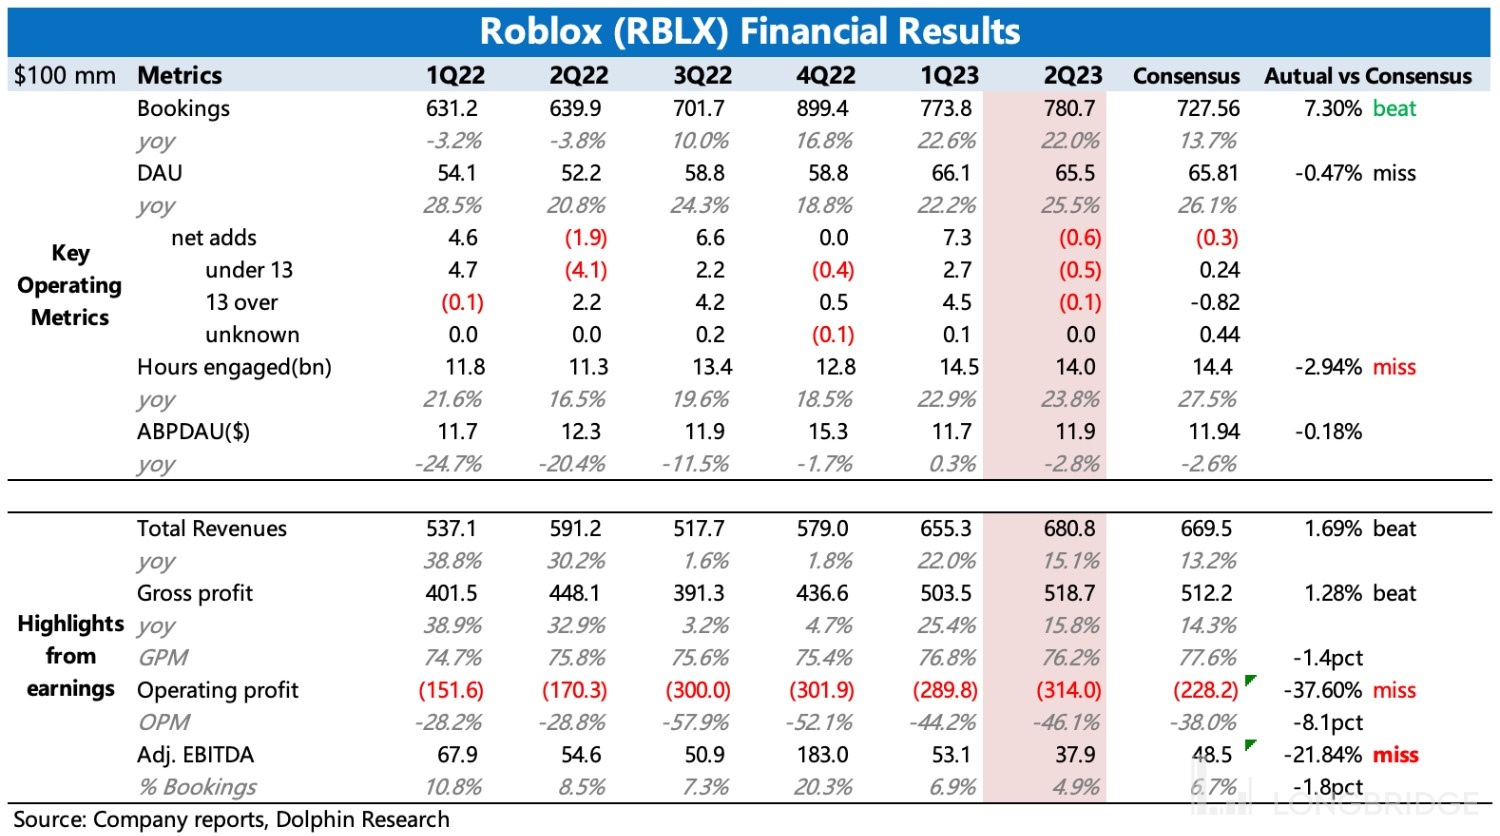 Roblox (RBLX) Q3 2023 earnings results report 20% increase in DAUs  year-over-year